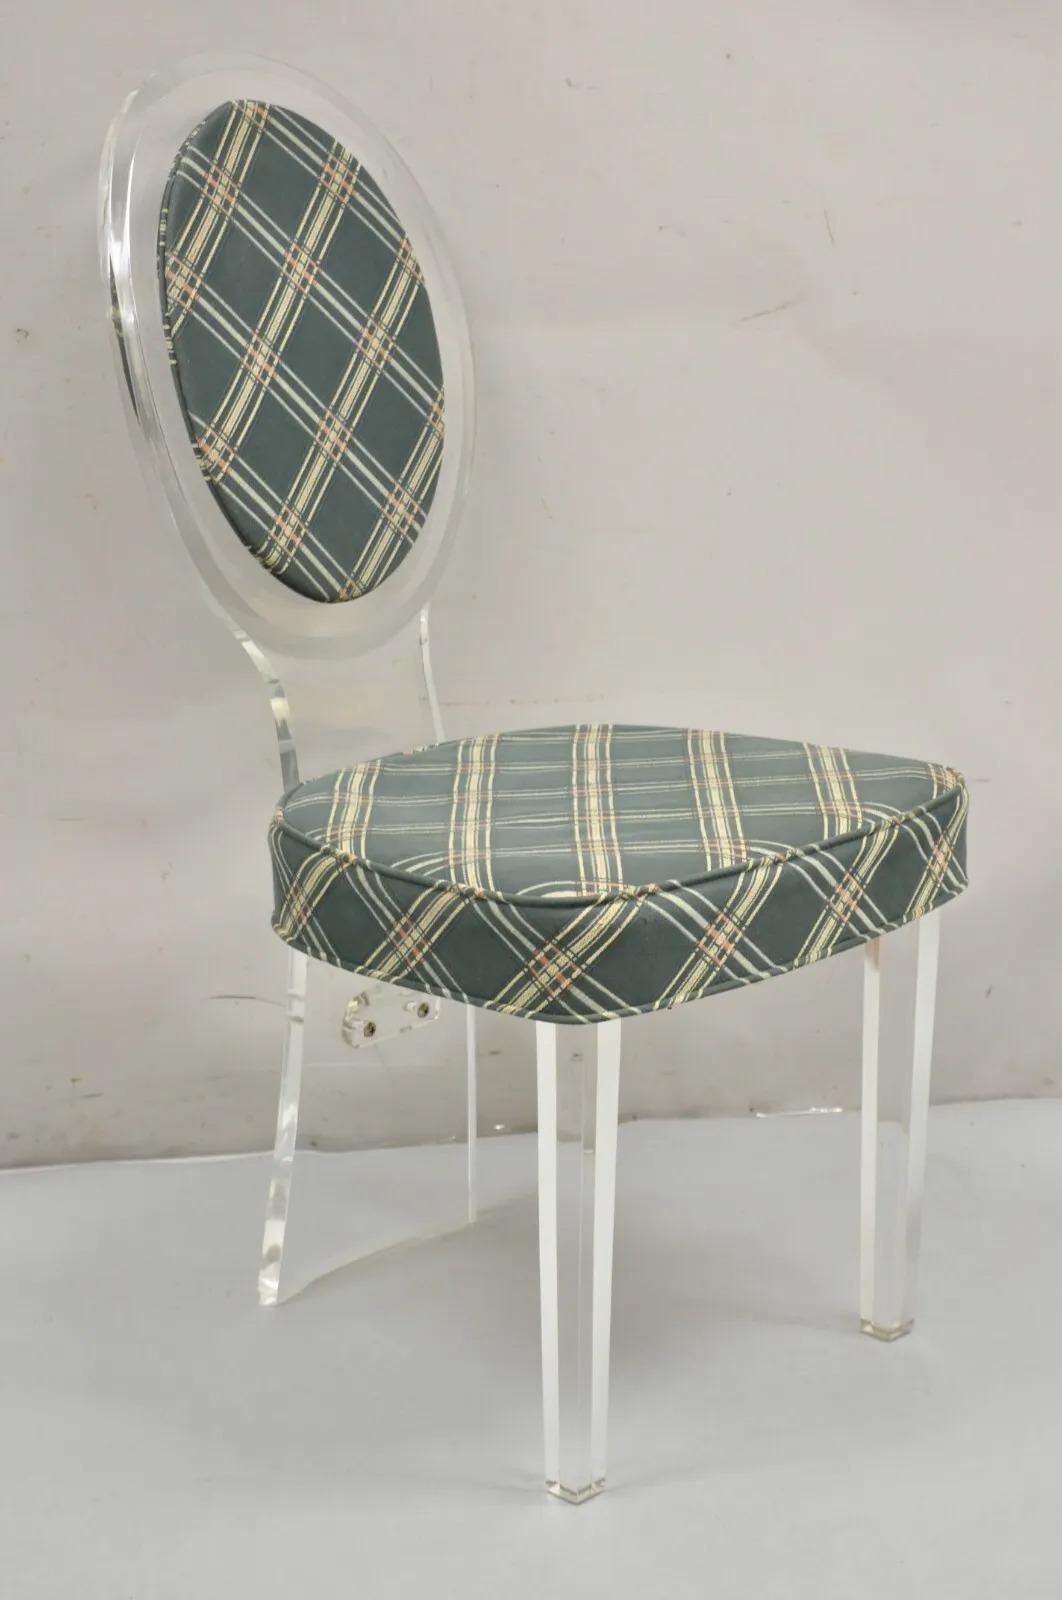 Hill Mfg Mid Century Modern Lucite Oval Cameo Back Upholstered Vanity Side Chair. Circa 1970. Measurements: 37.5